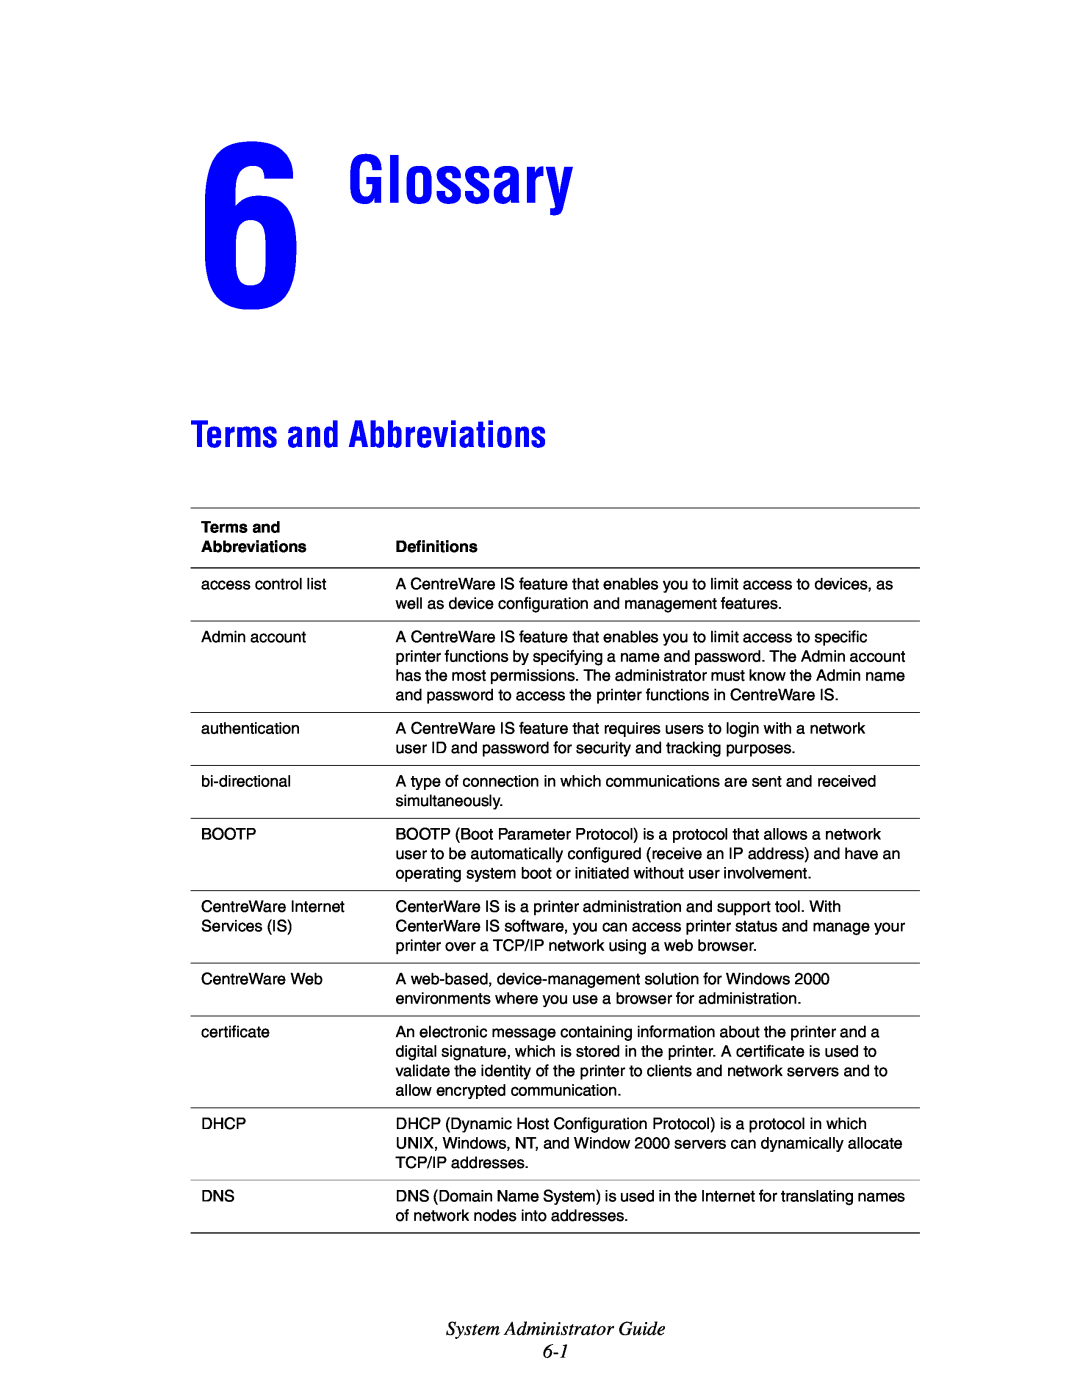 Xerox 6300, 6350, 8500, 8550 manual Glossary, Terms and Abbreviations, System Administrator Guide 6-1 